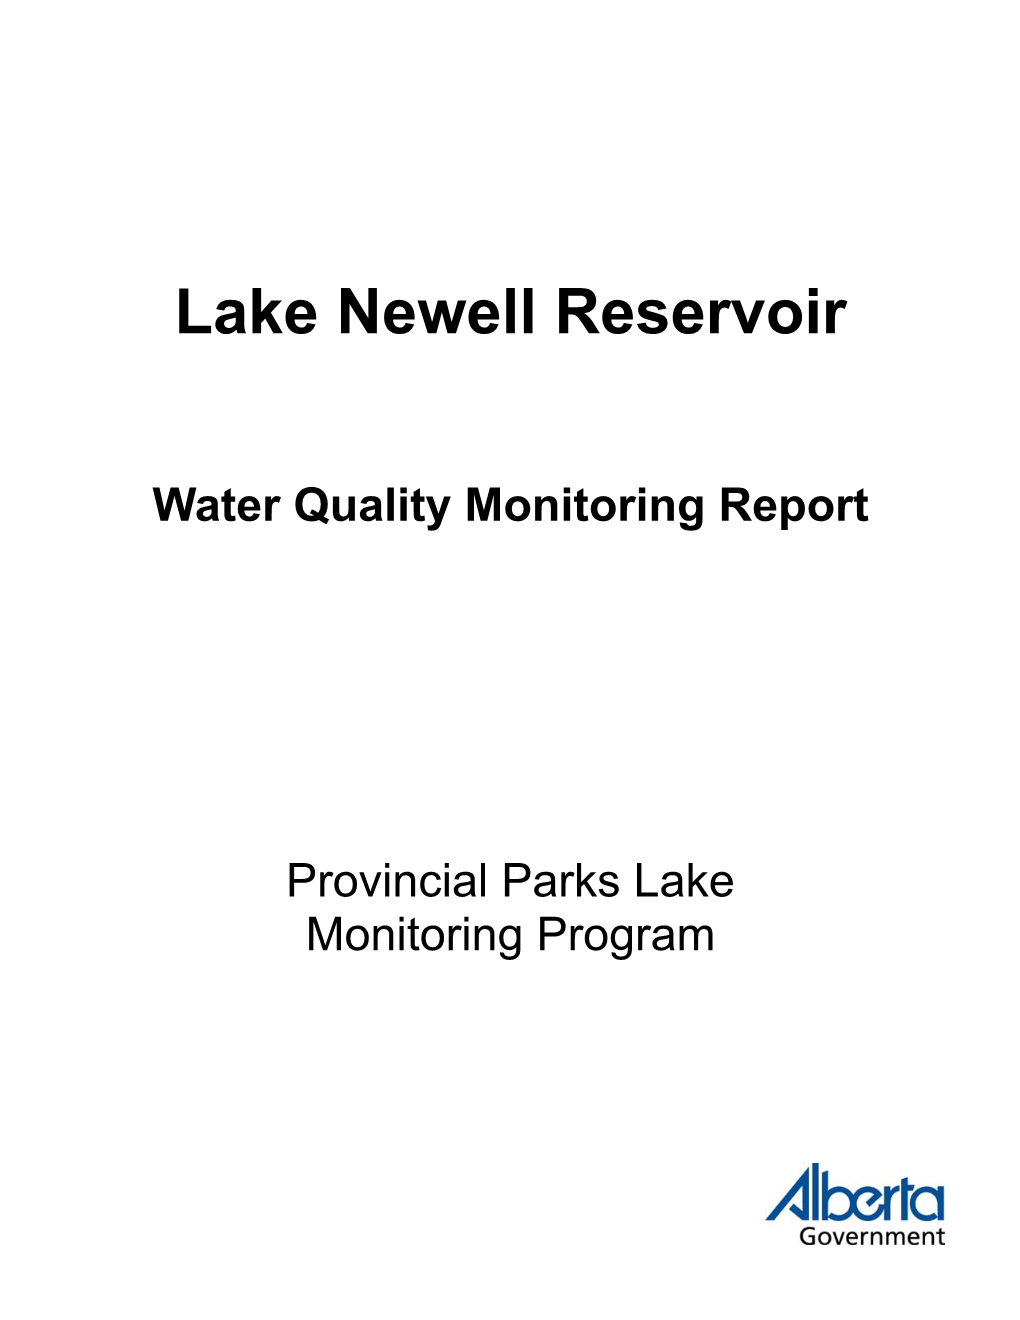 Lake Newell Reservoir Water Quality Monitoring Report - Provincial Parks Lake Monitoring Program